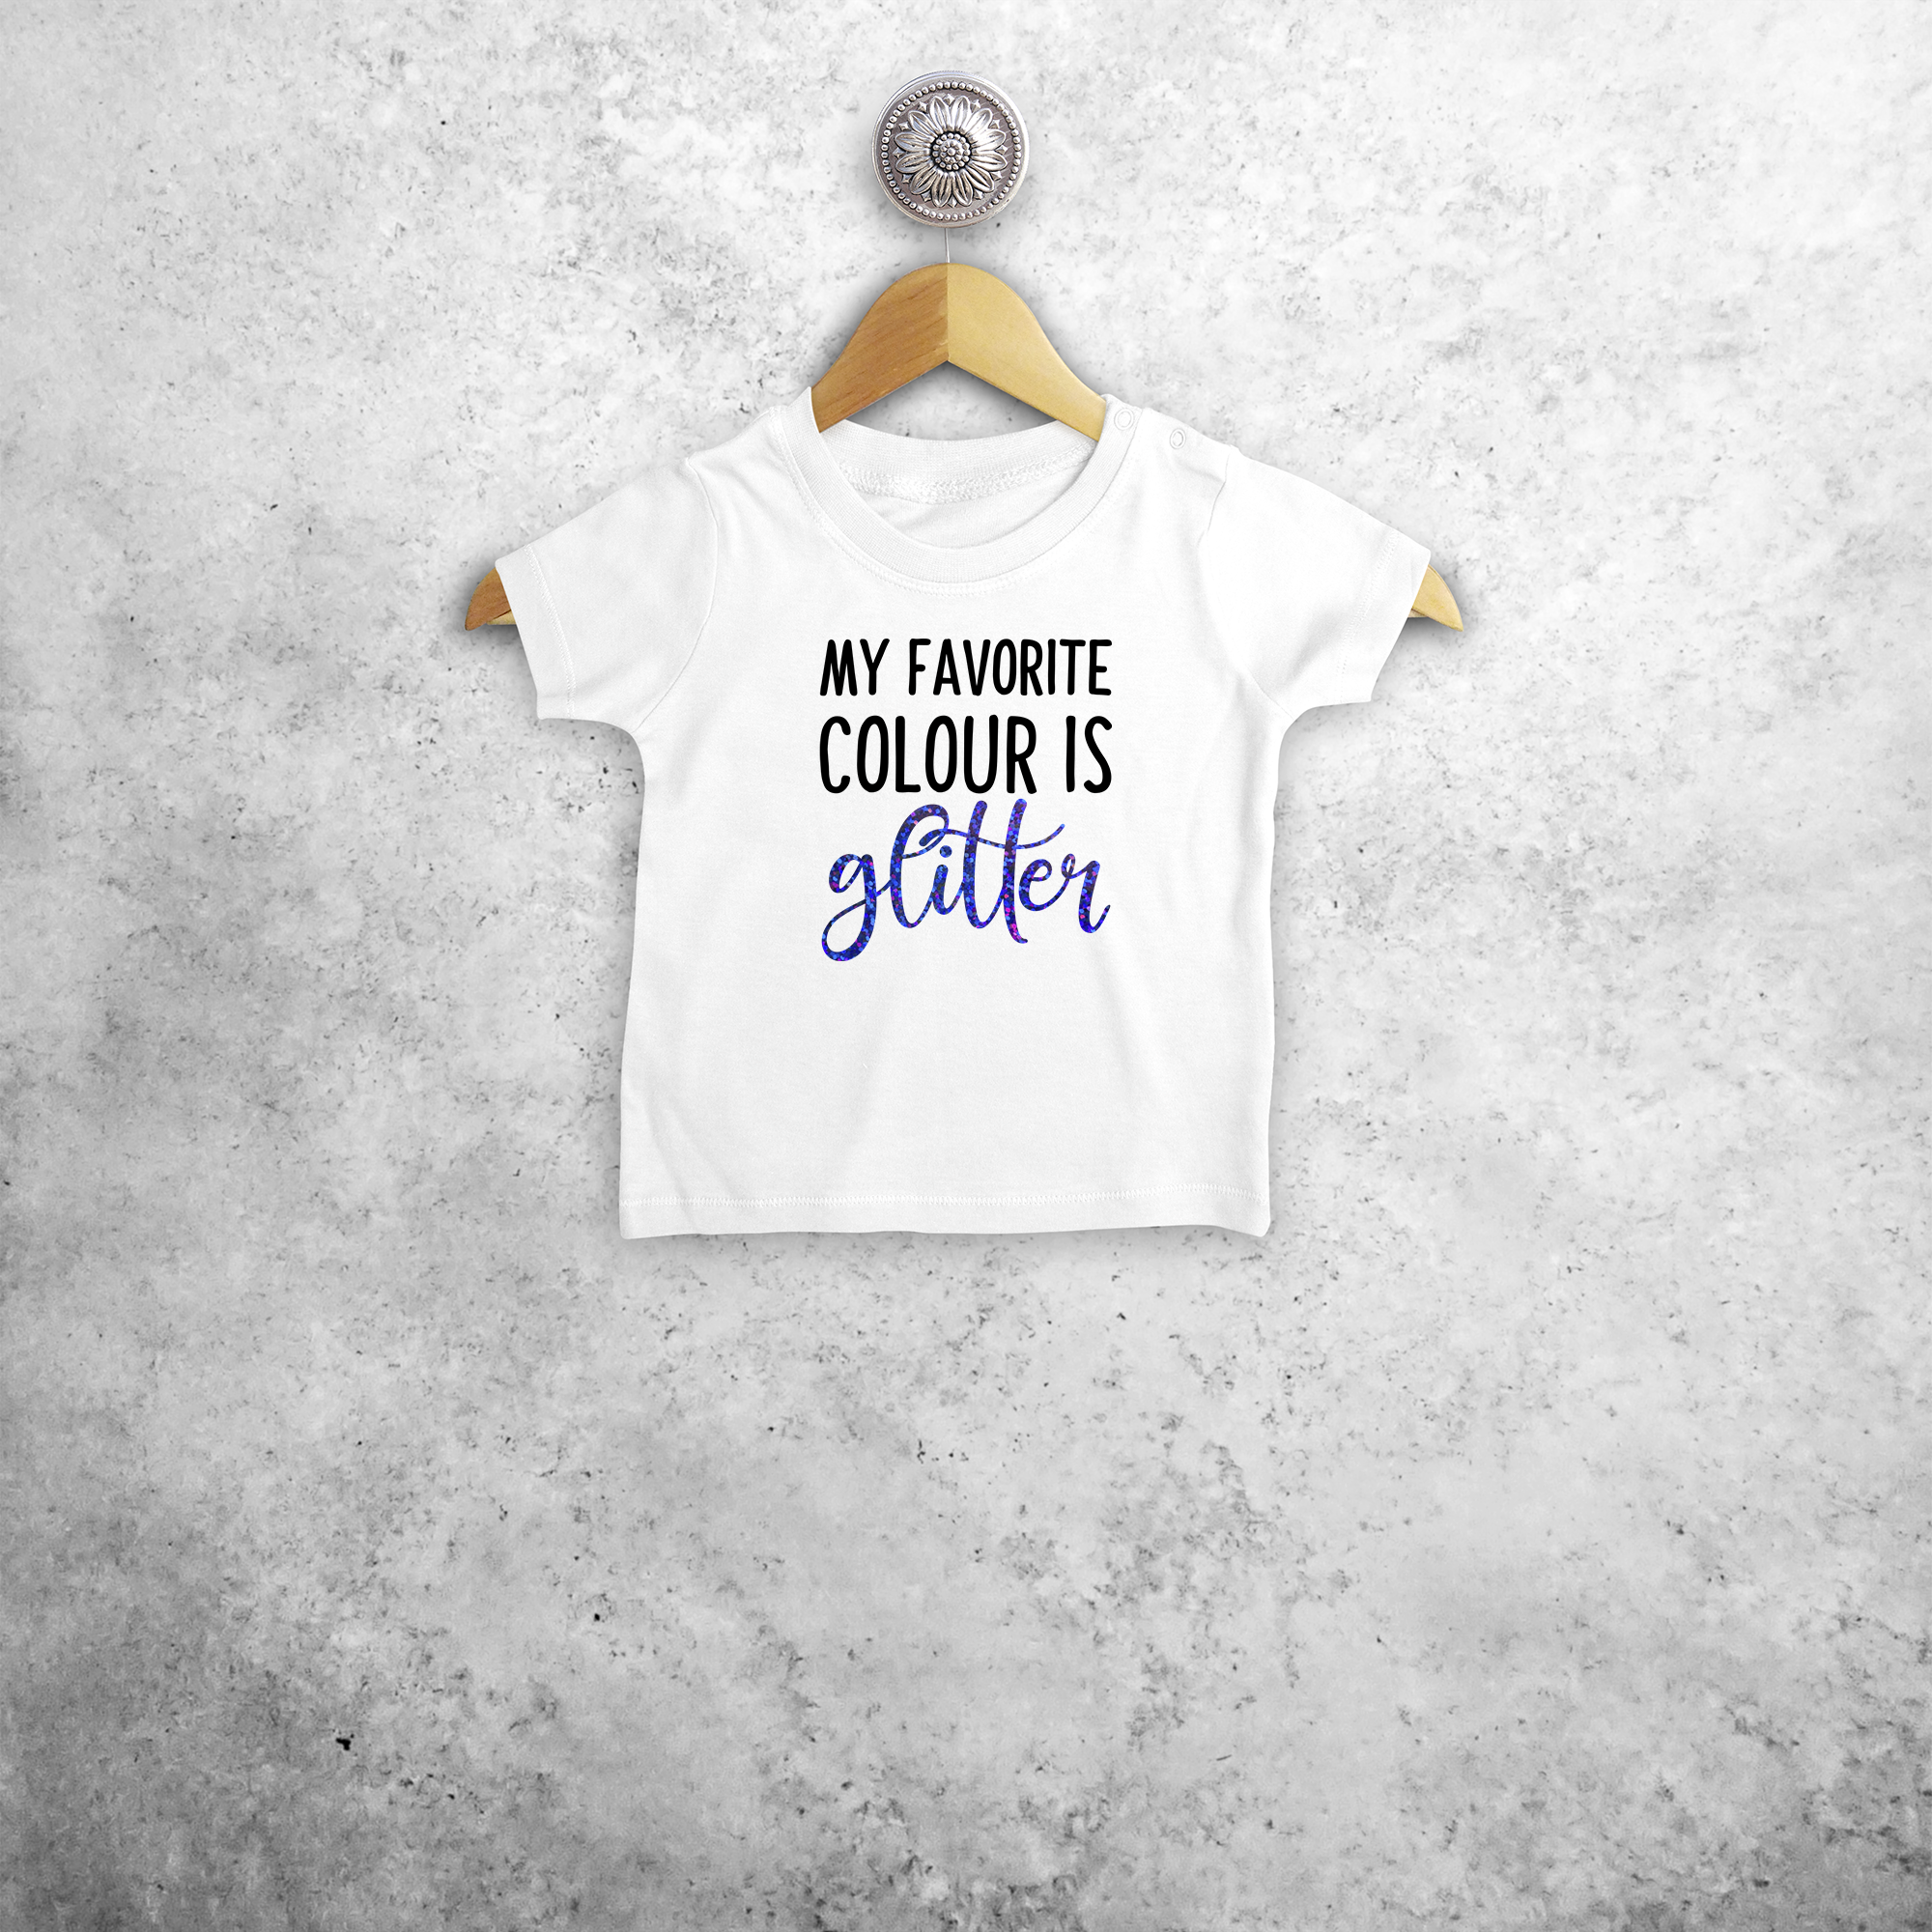 'My favorite colour is glitter' baby shortsleeve shirt